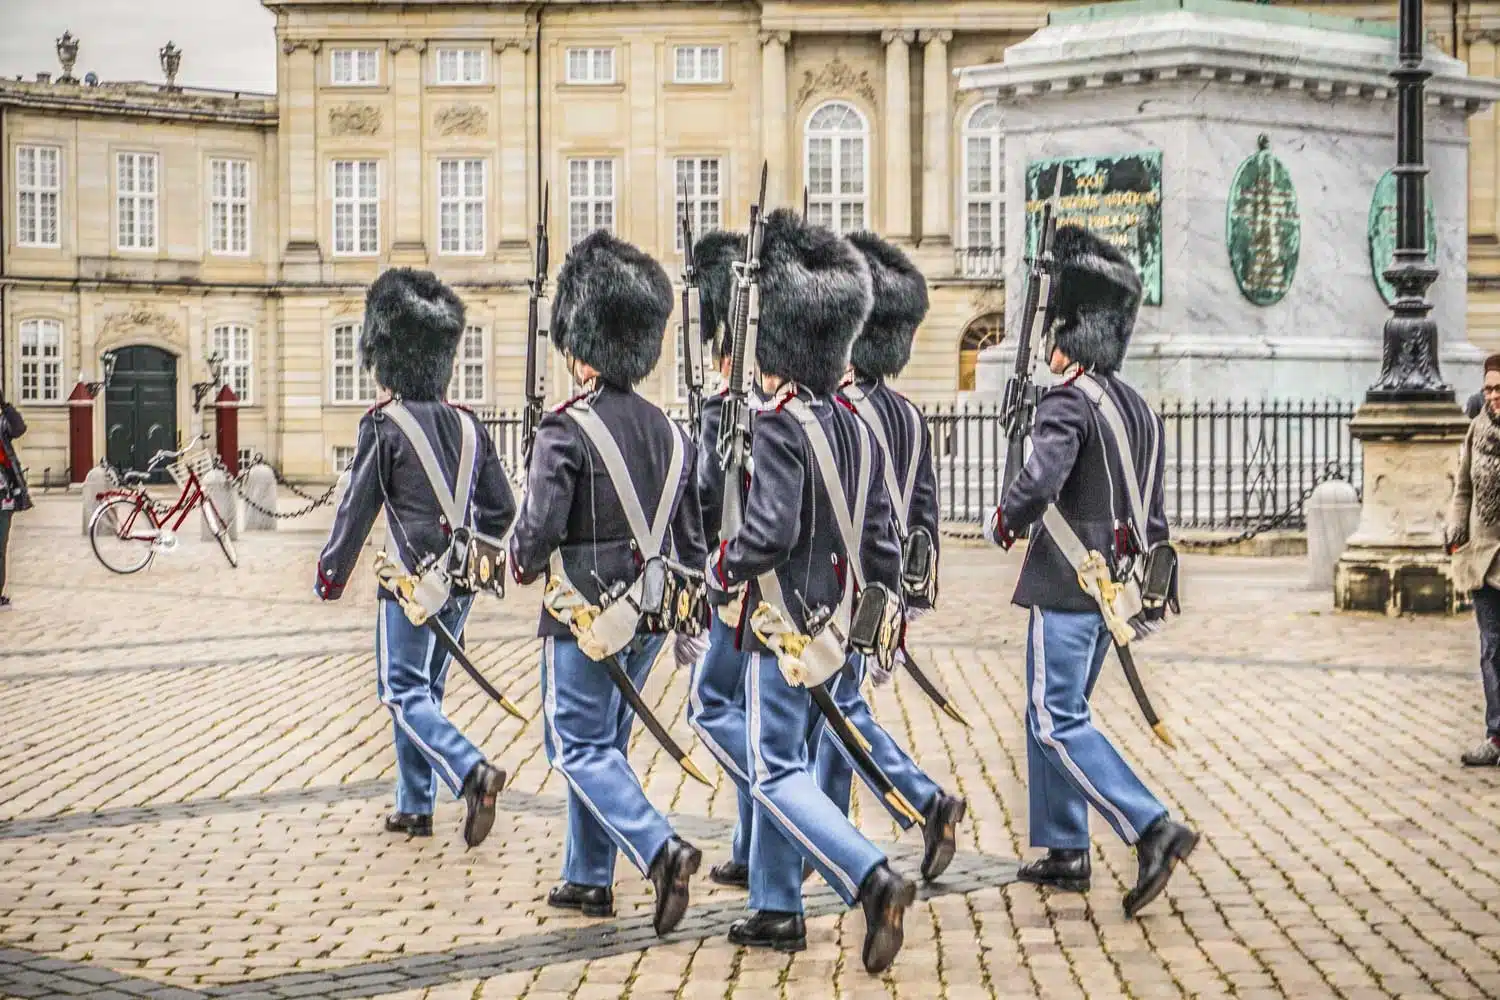 Changing of the guard at the Amalienborg Palace